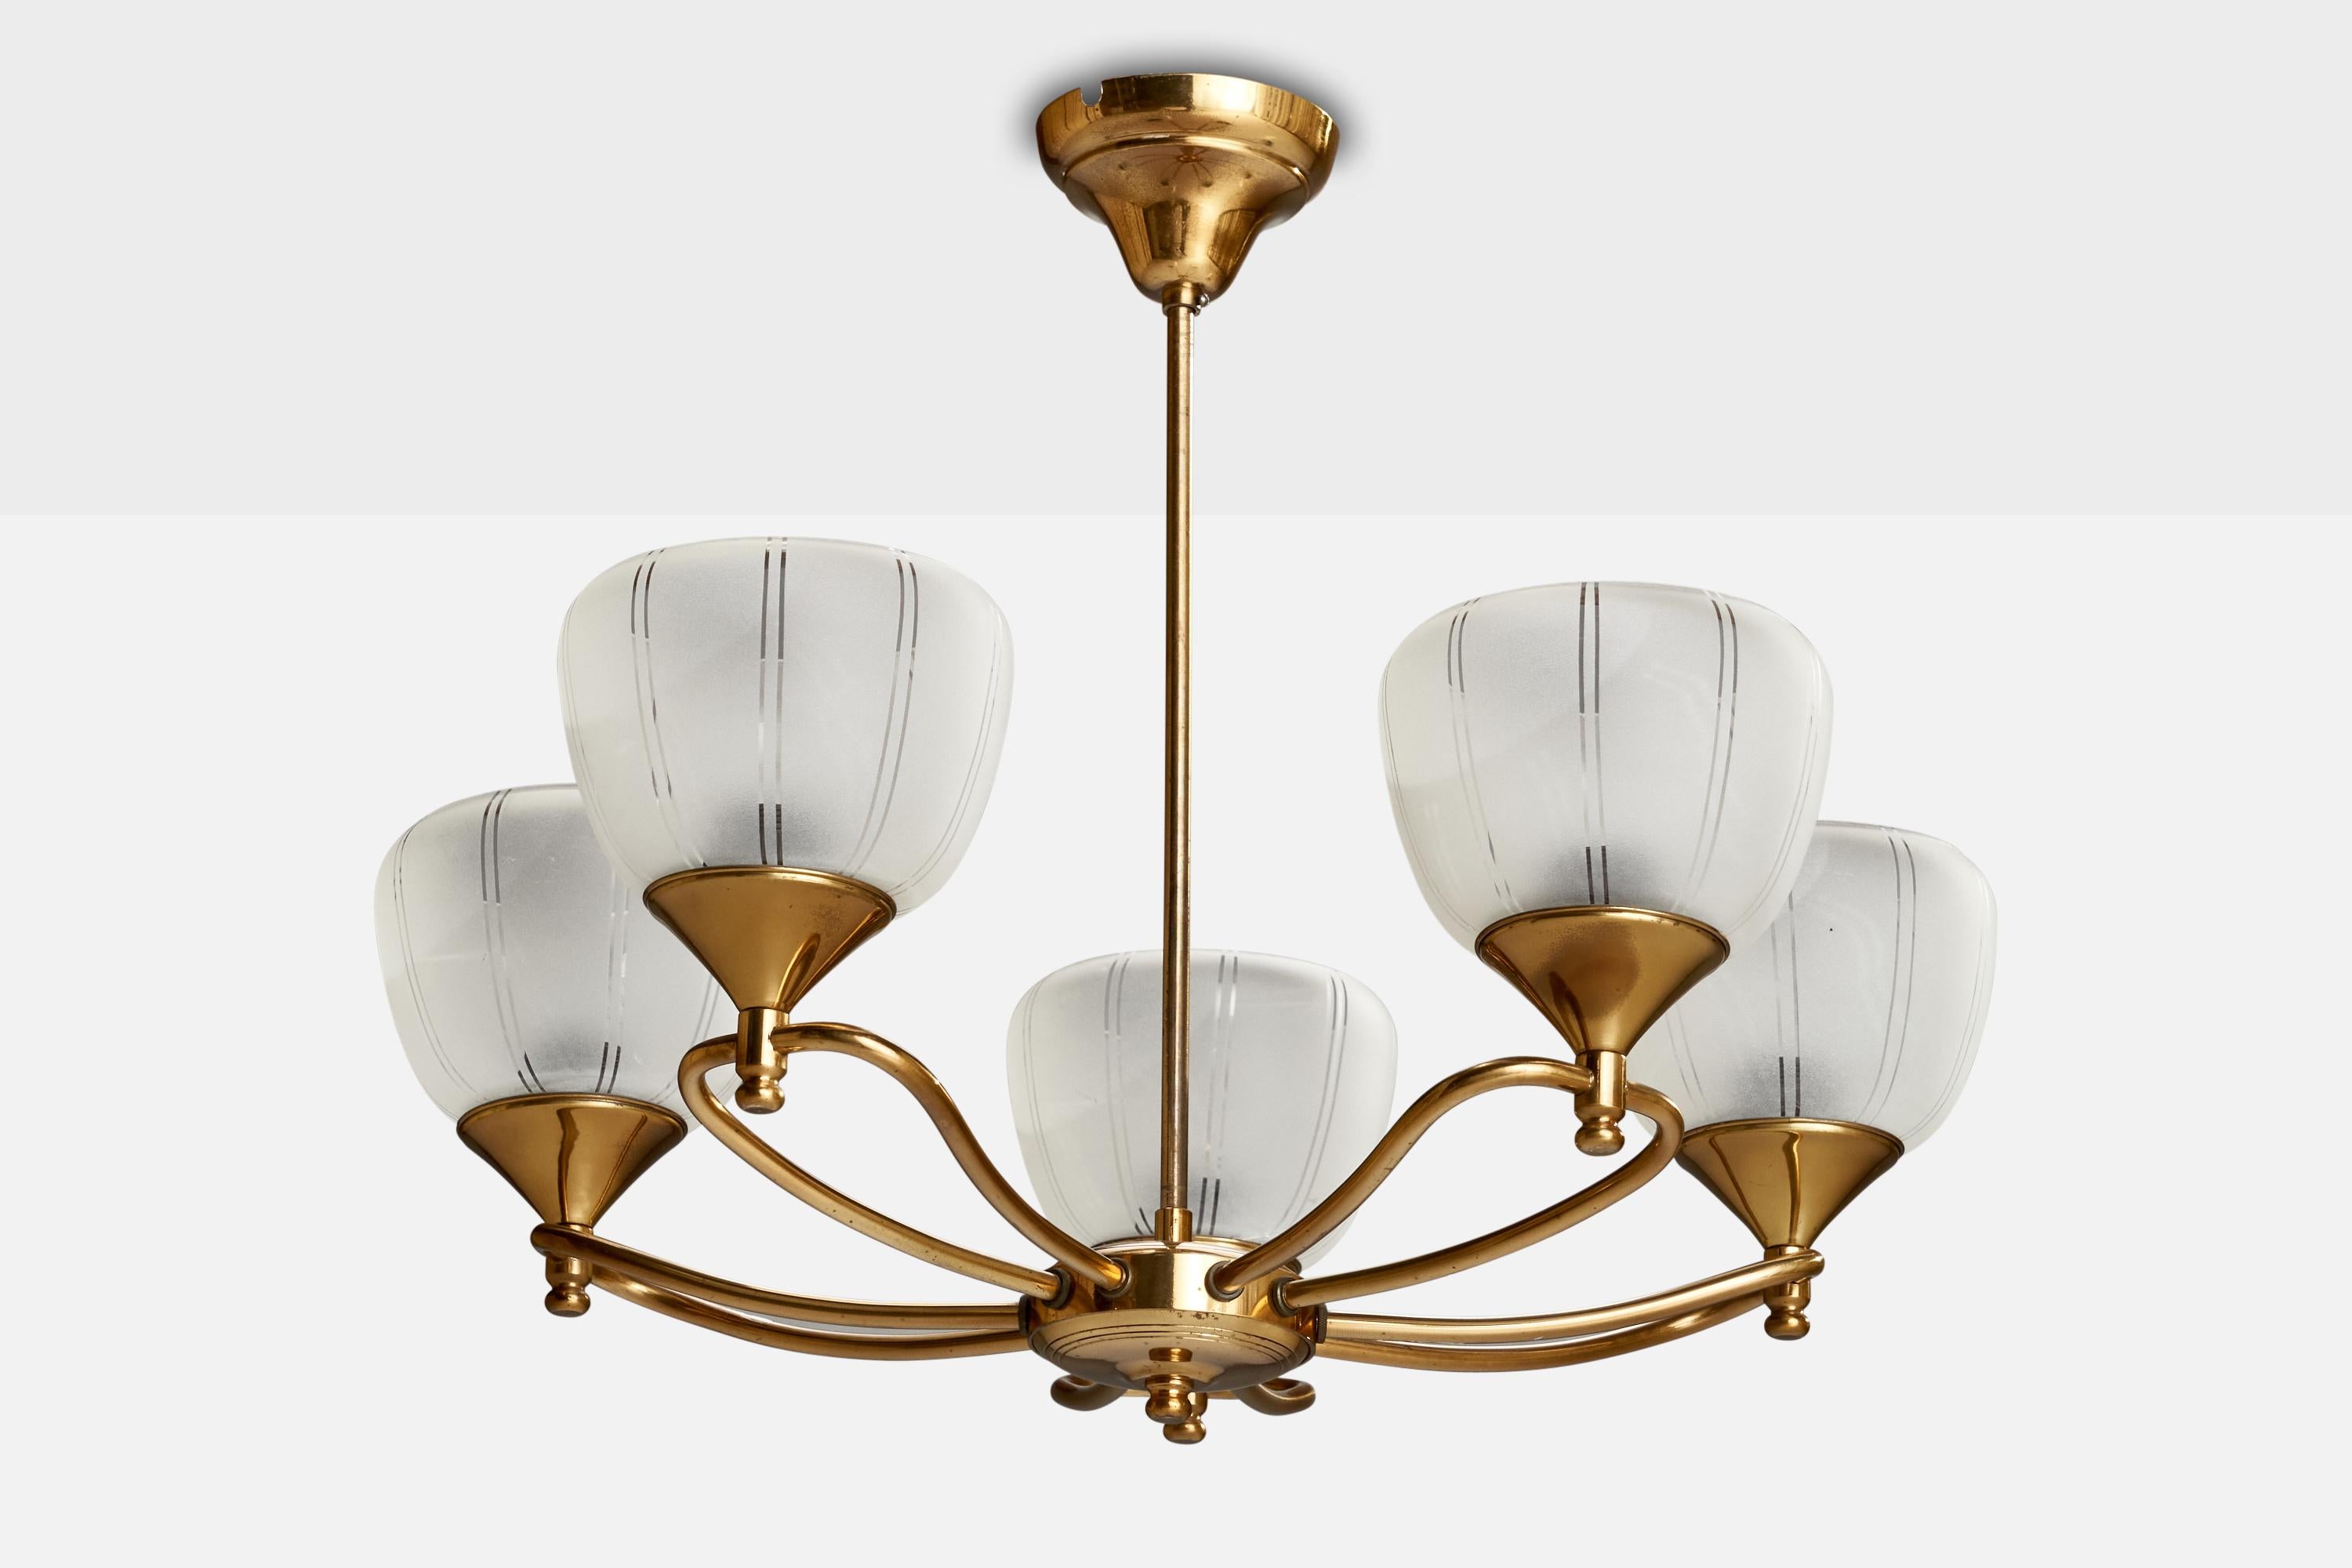 A brass and etched glass chandelier designed and produced in Sweden, c. 1950s.

Dimensions of canopy (inches): 3” H x 4.32” Diameter
Socket takes standard E-26 bulbs. 5 socket.There is no maximum wattage stated on the fixture. All lighting will be